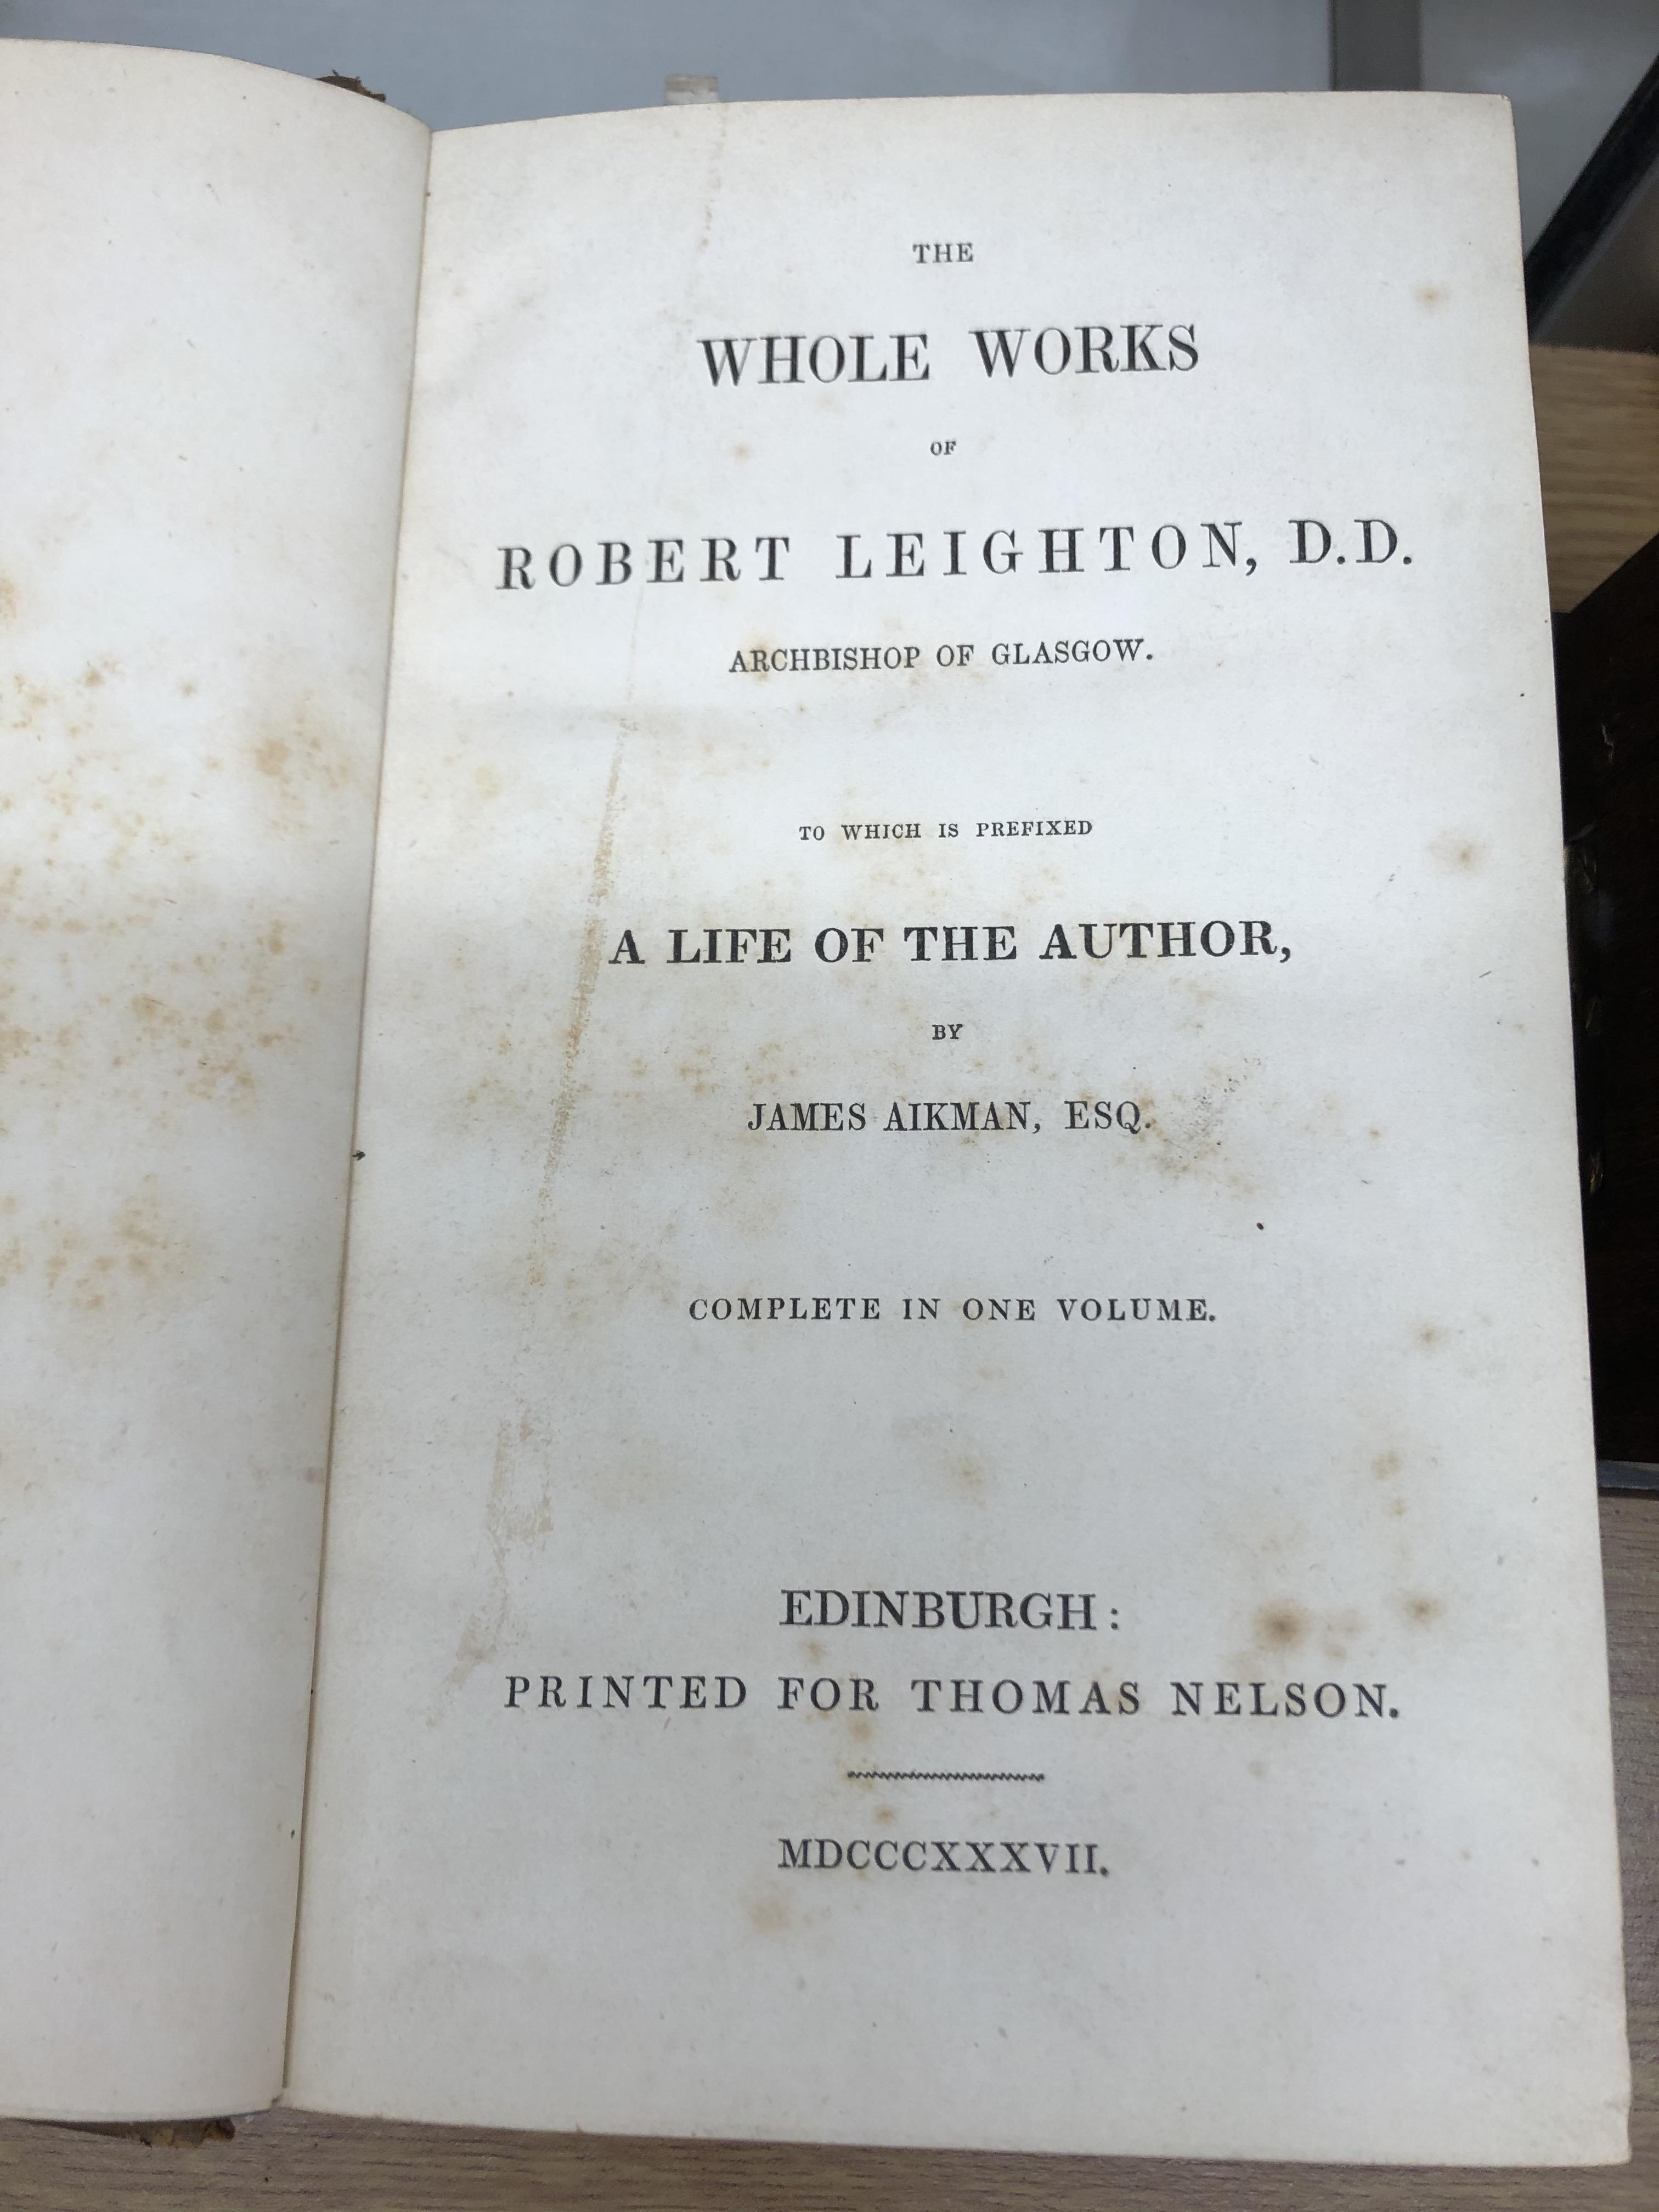 ANTIQUARIAN BOOK - THE WHOLE WORKS OF ROBERT LEIGHTON BY JAMES AIKMAN IN ONE VOLUME EDINGBURGH - Image 4 of 6